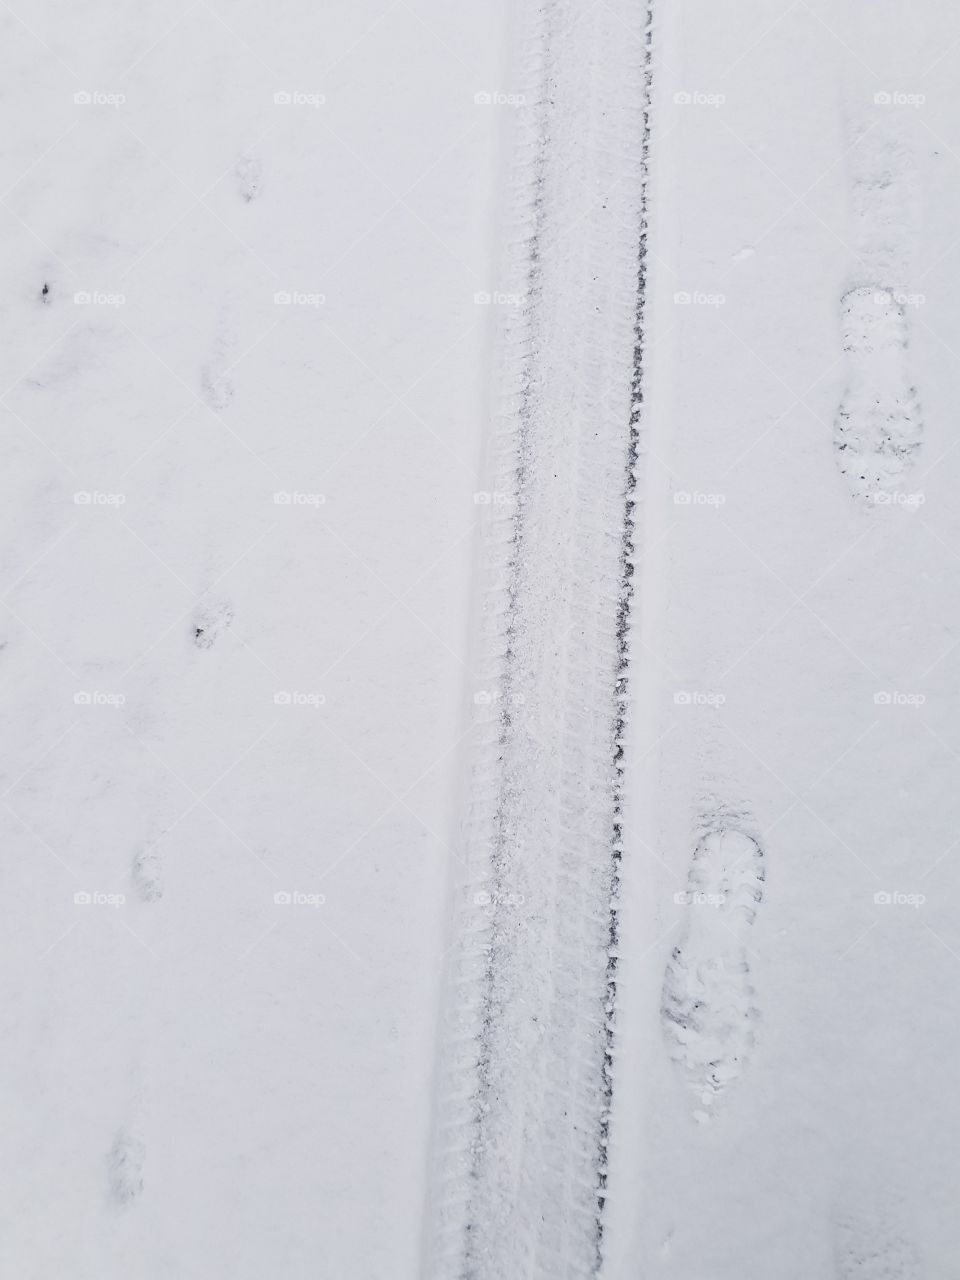 traces on the snow